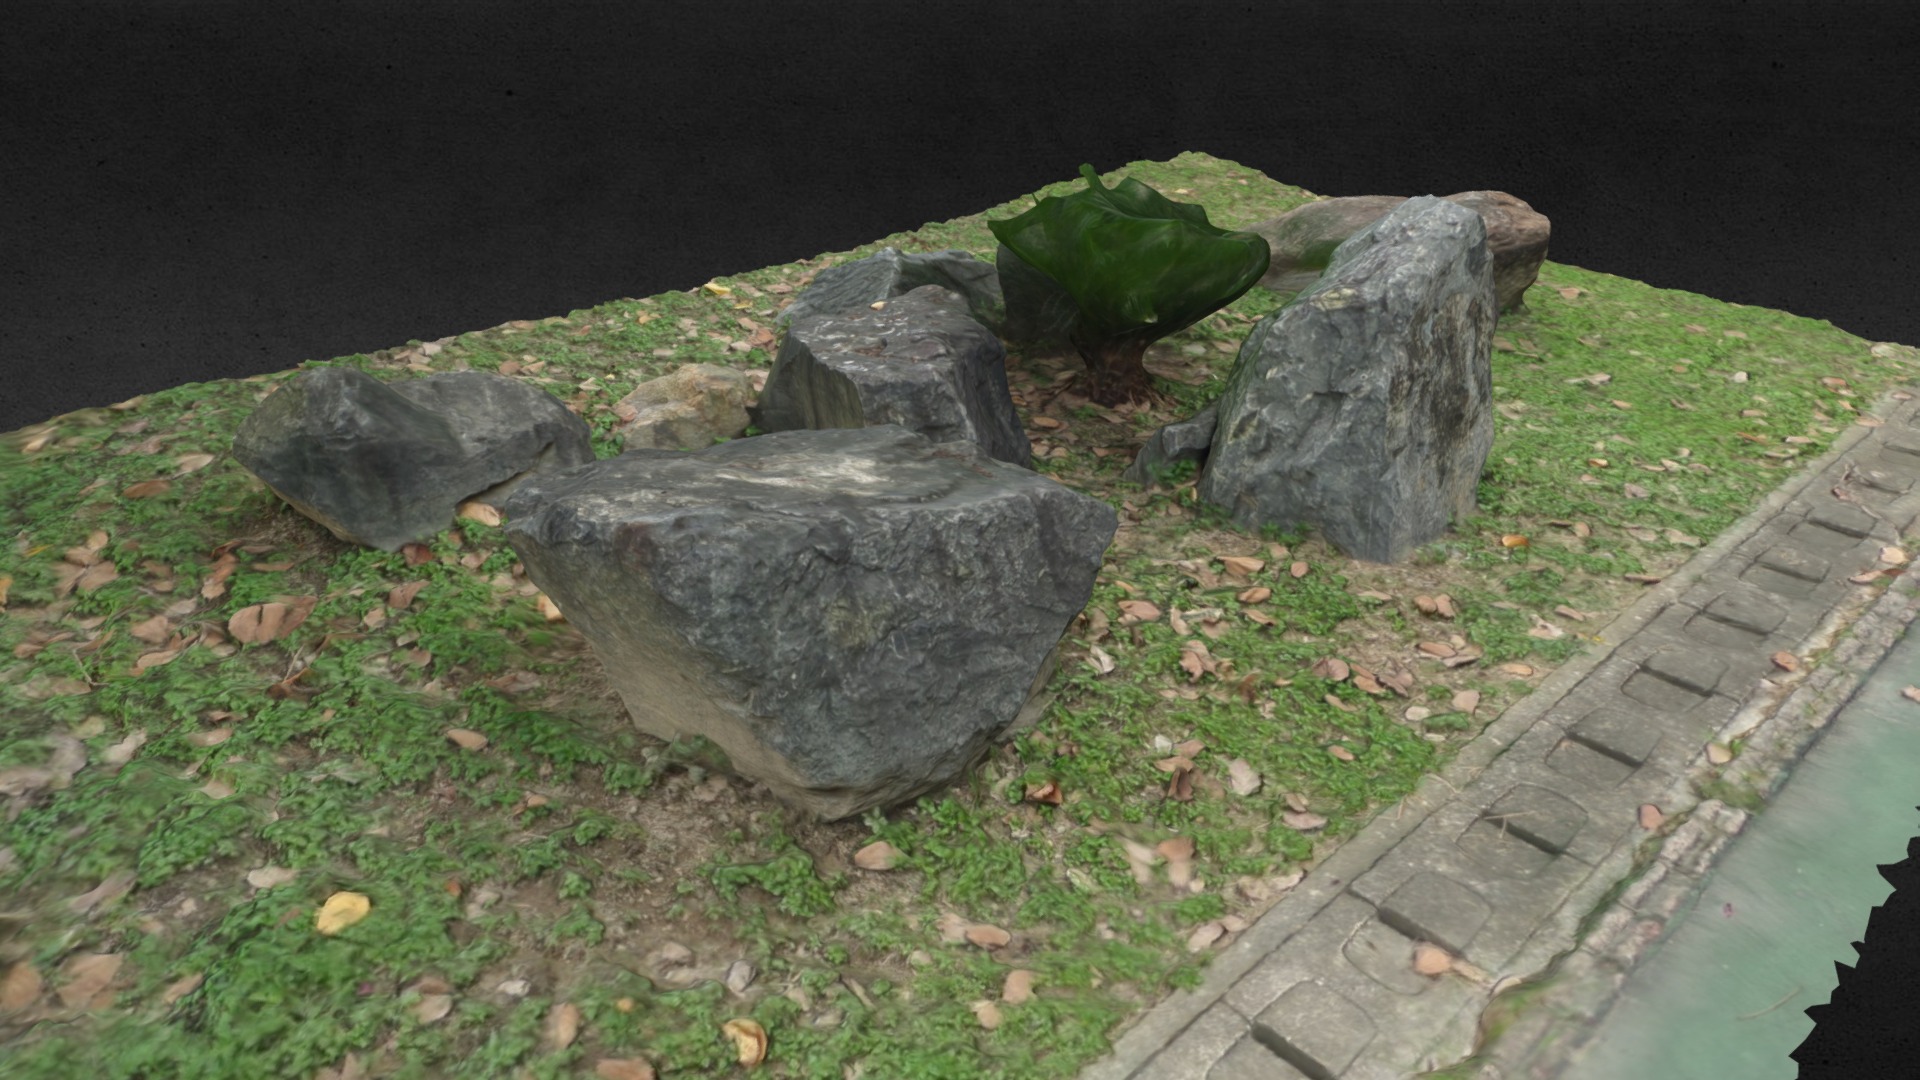 3D model Rocks By The River - This is a 3D model of the Rocks By The River. The 3D model is about a group of rocks on a stone surface.